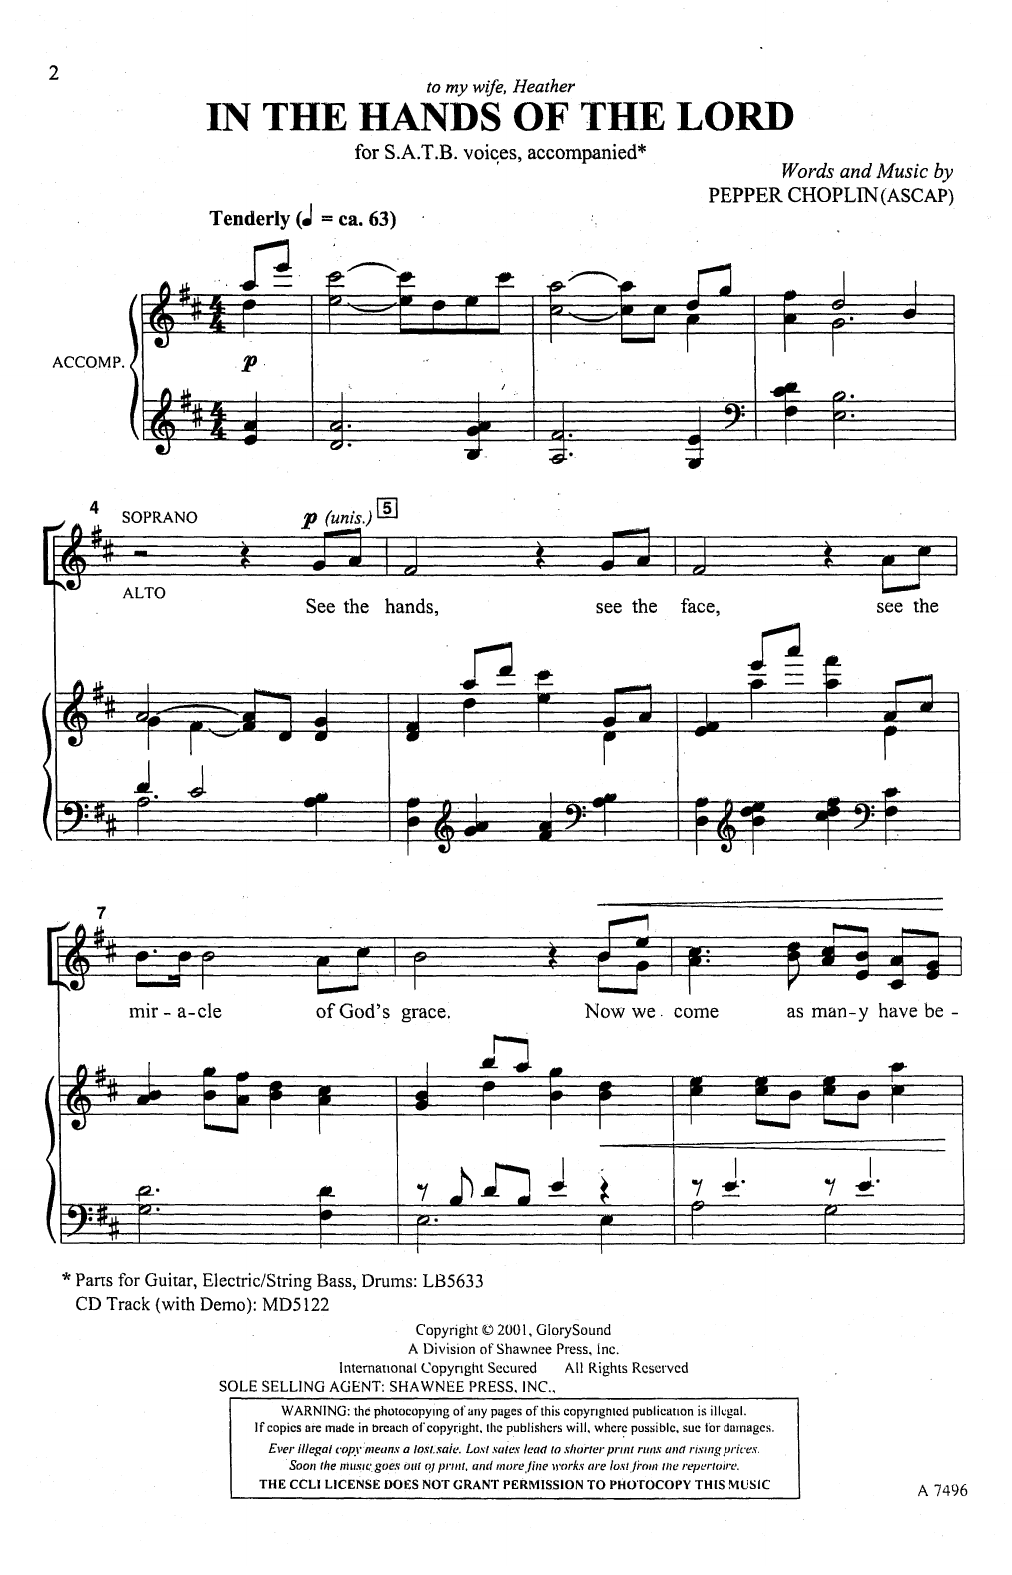 Download Pepper Choplin In The Hands Of The Lord Sheet Music